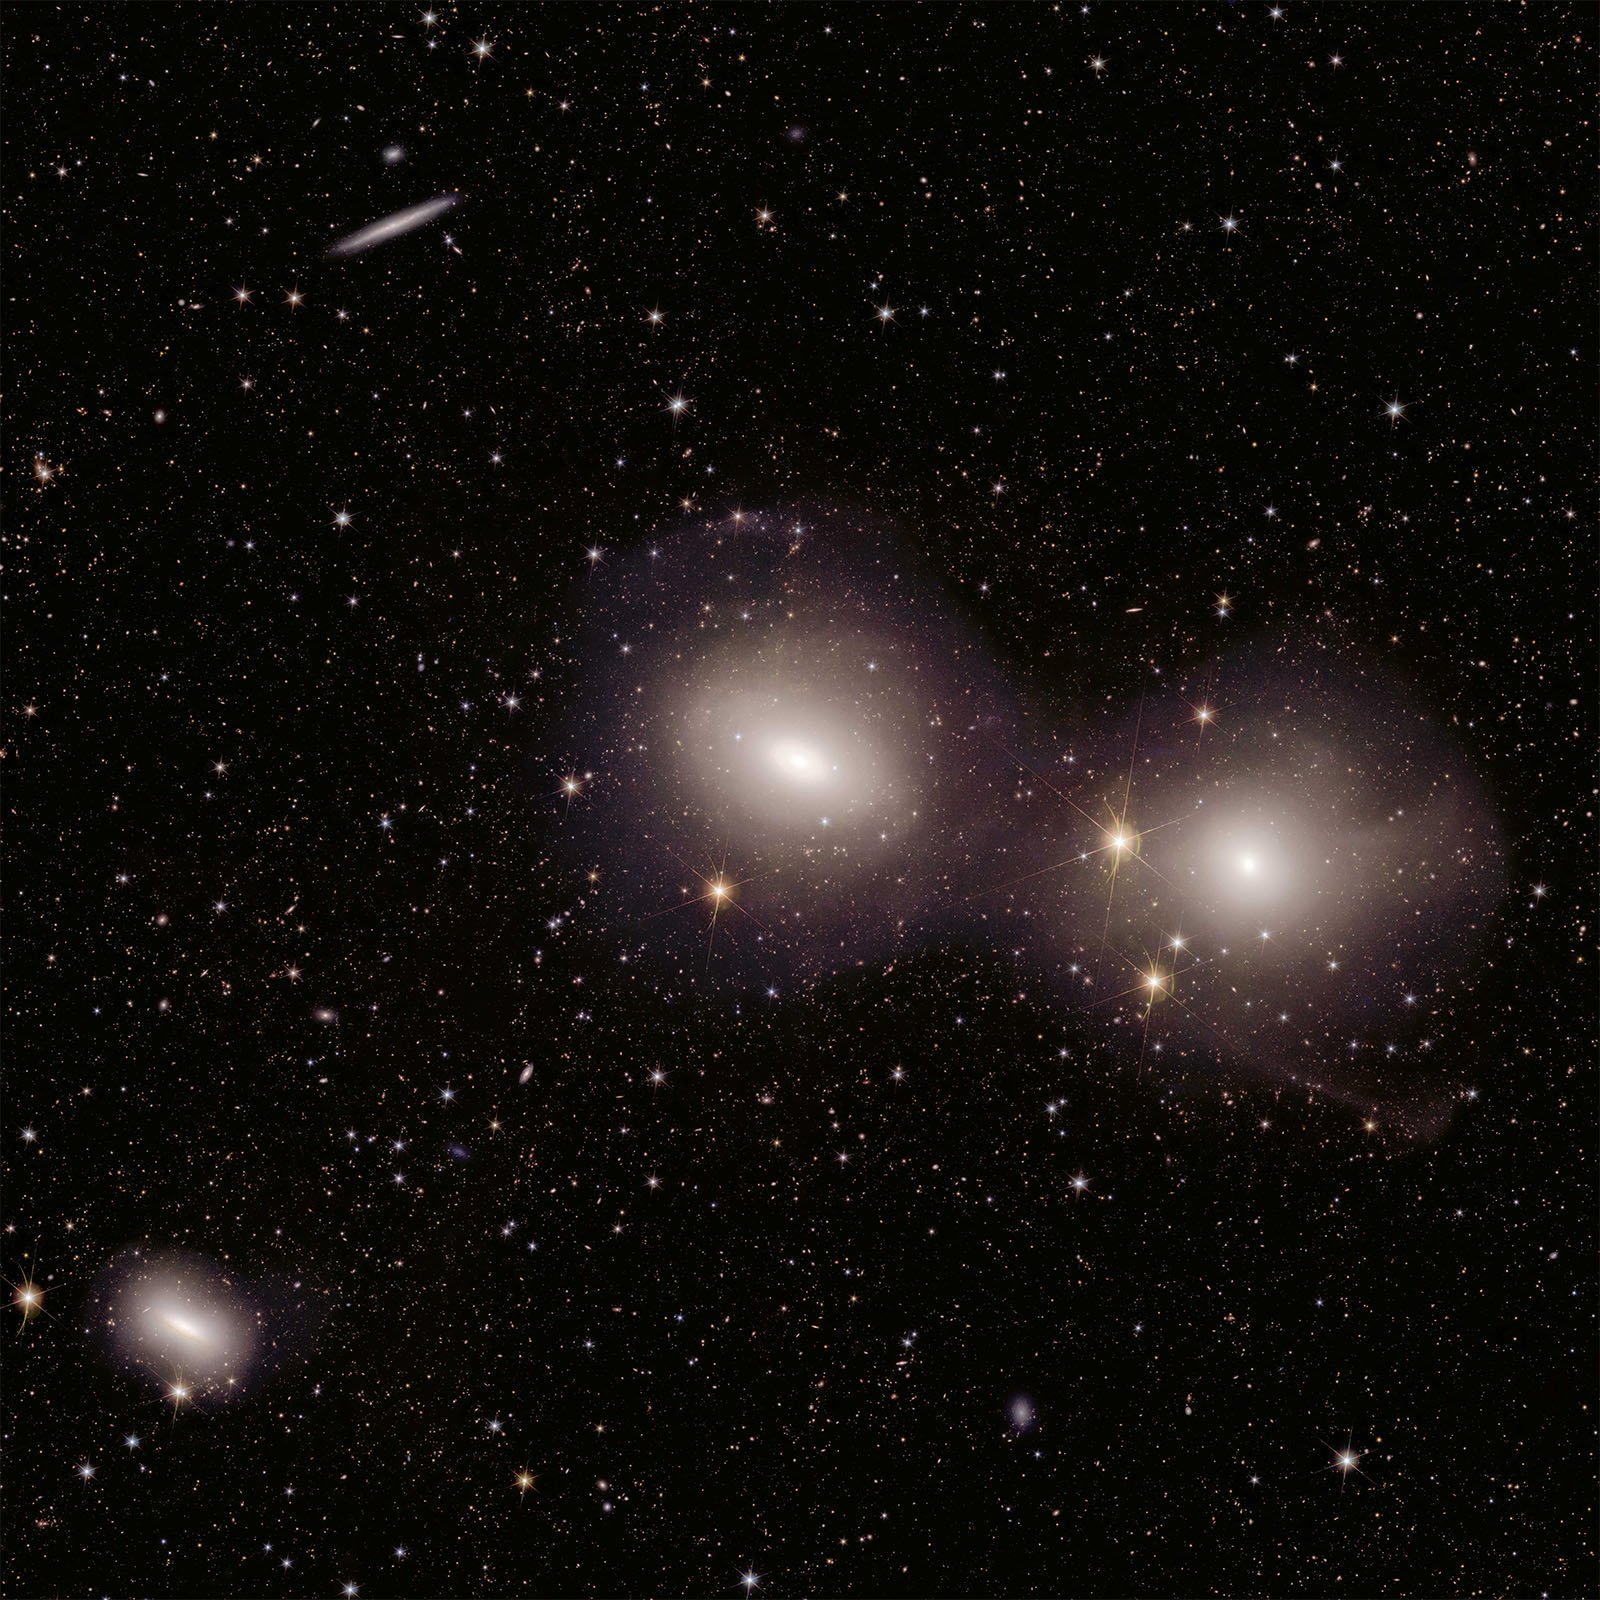 A deep space image showing two prominent, glowing galaxies in the center, surrounded by numerous stars and faint galaxies scattered across the dark expanse of the universe. The galaxies emit soft, diffuse light, contrasting against the vast, star-filled background.